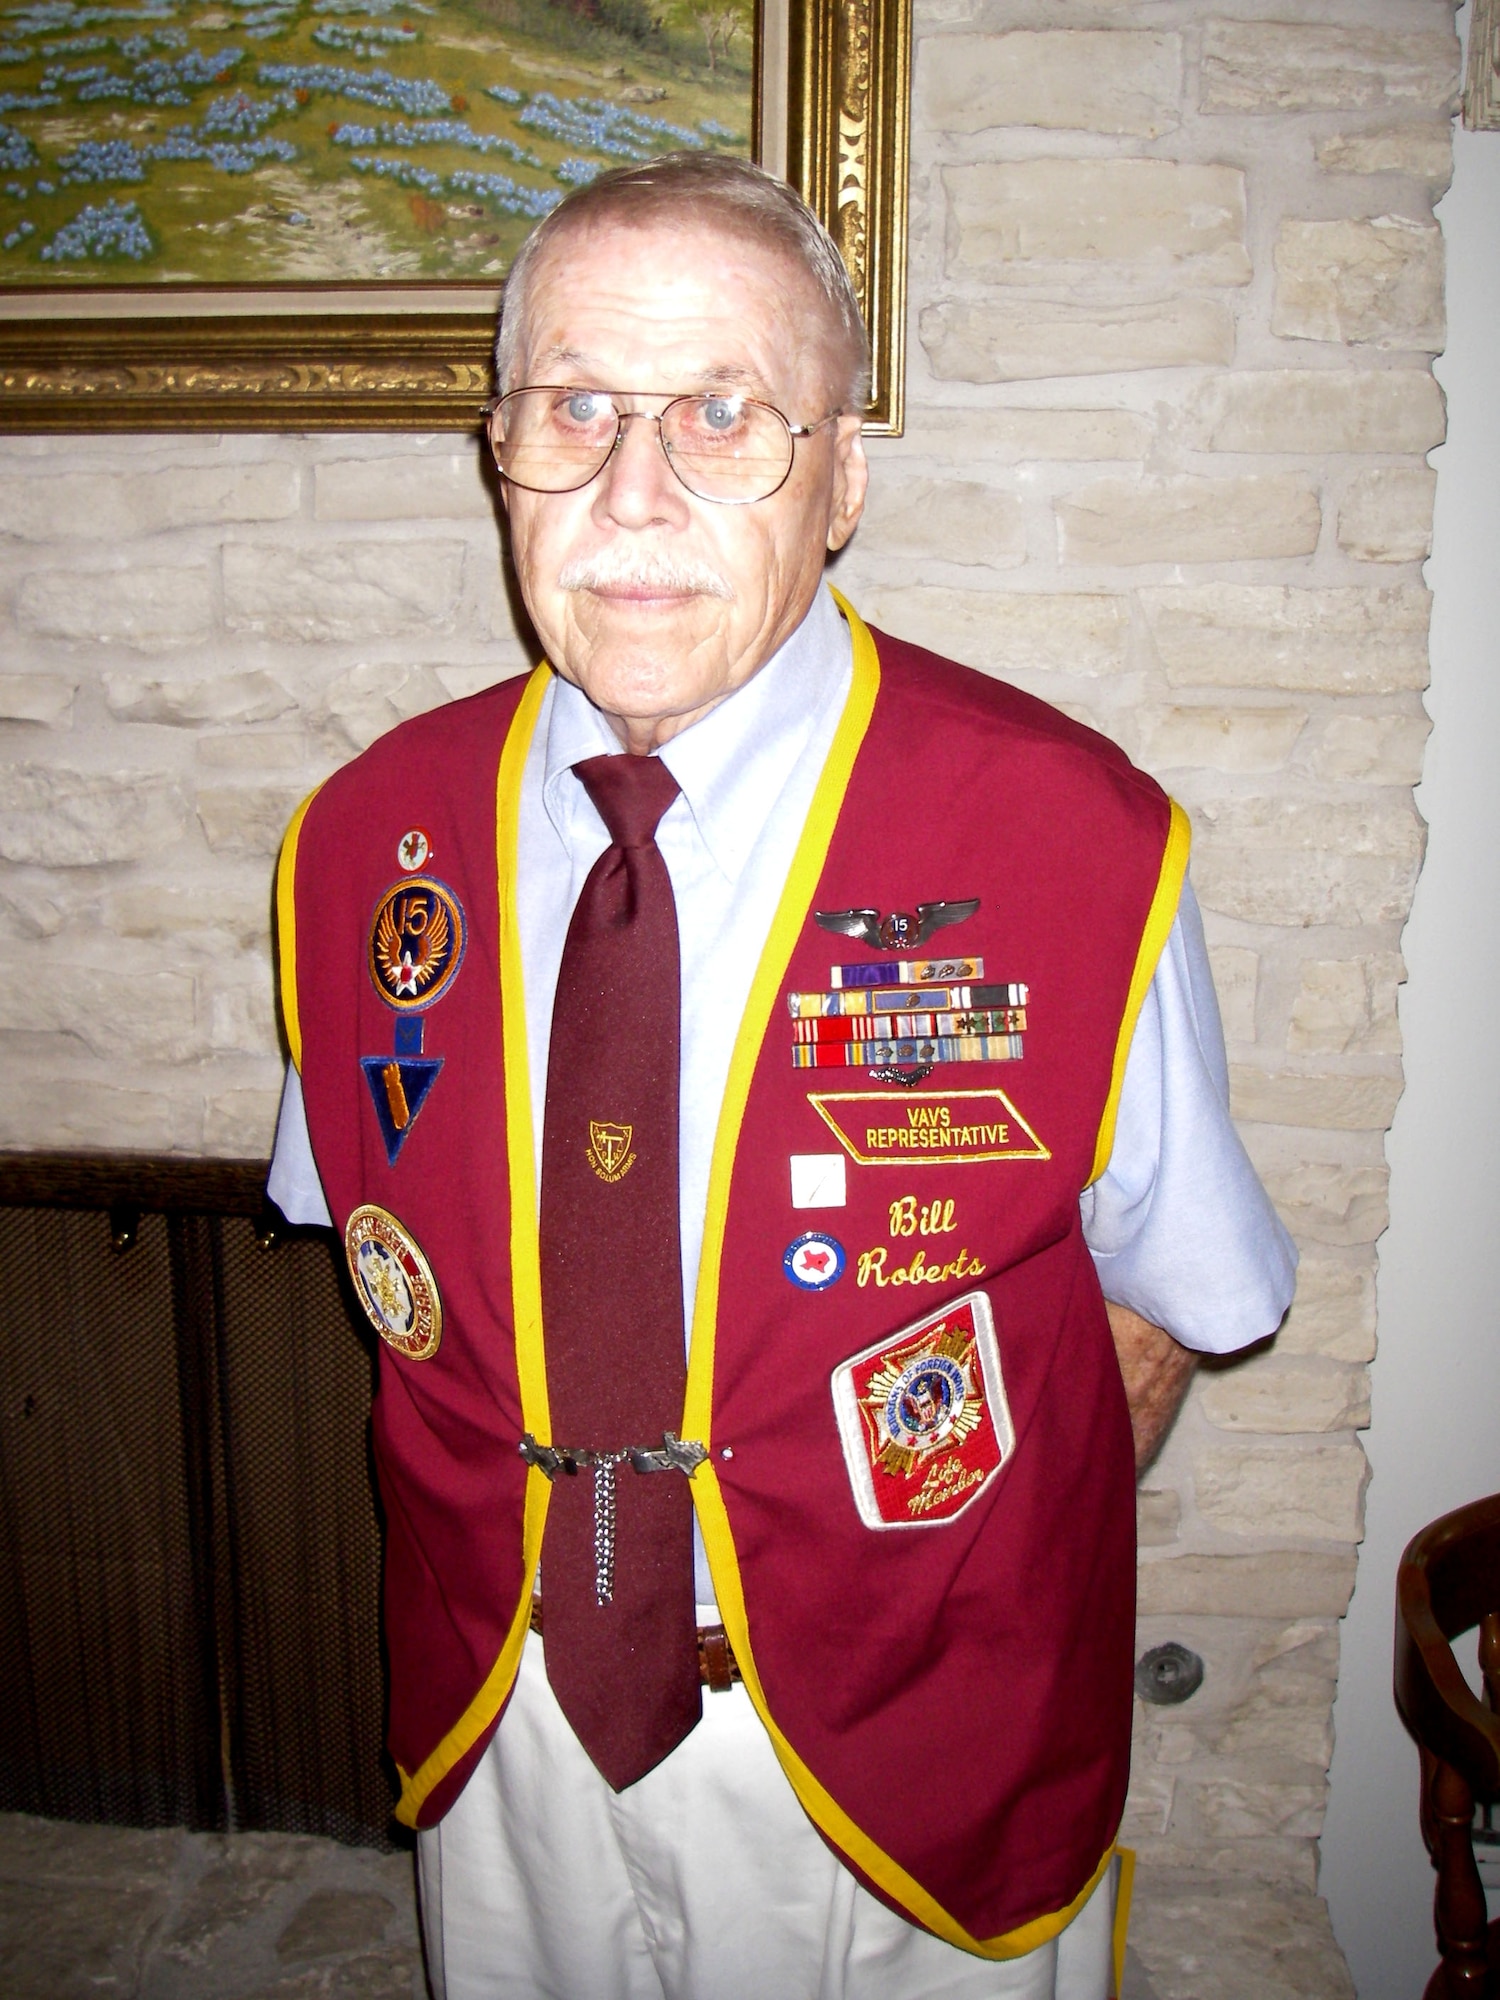 Retired Maj. William Roberts Jr. is a former POW who was a B-17 Flying Fortress aerial gunner enlisted in the Army Air Corps when his aircraft was shot down July 7, 1944, near Velehrad, Czech Republic. He spent 11 months as a POW in various camps in Poland before being liberated by British forces in May 1945. (U.S. Air Force photo/Staff. Sgt. Shad Eidson) 

